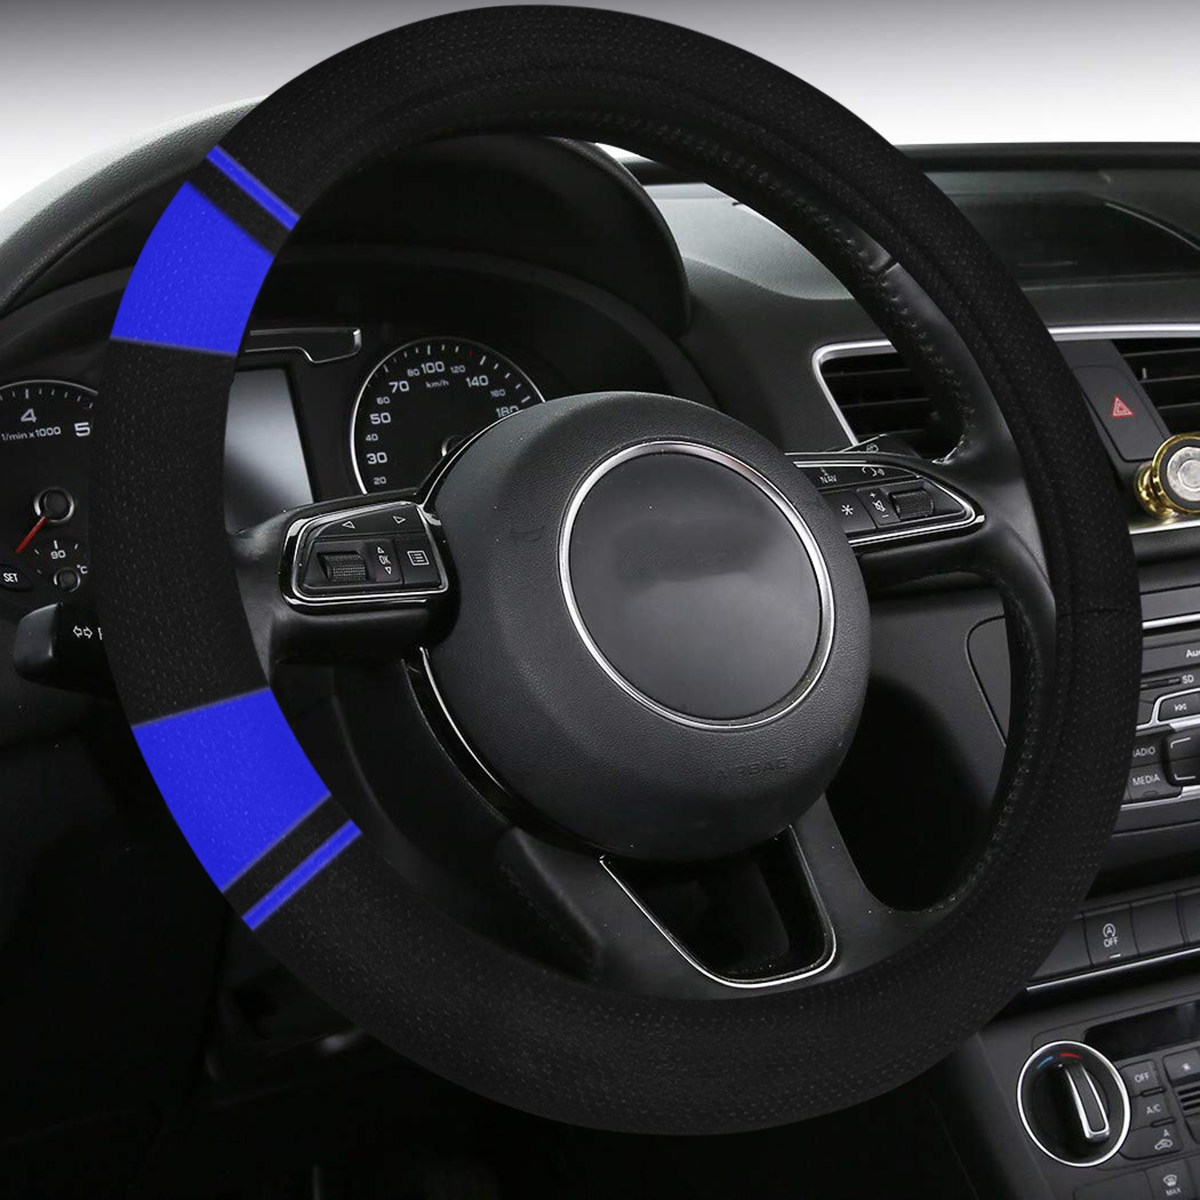 Race Car Stripes Black and Blue Steering Wheel Cover with Anti-Slip Insert